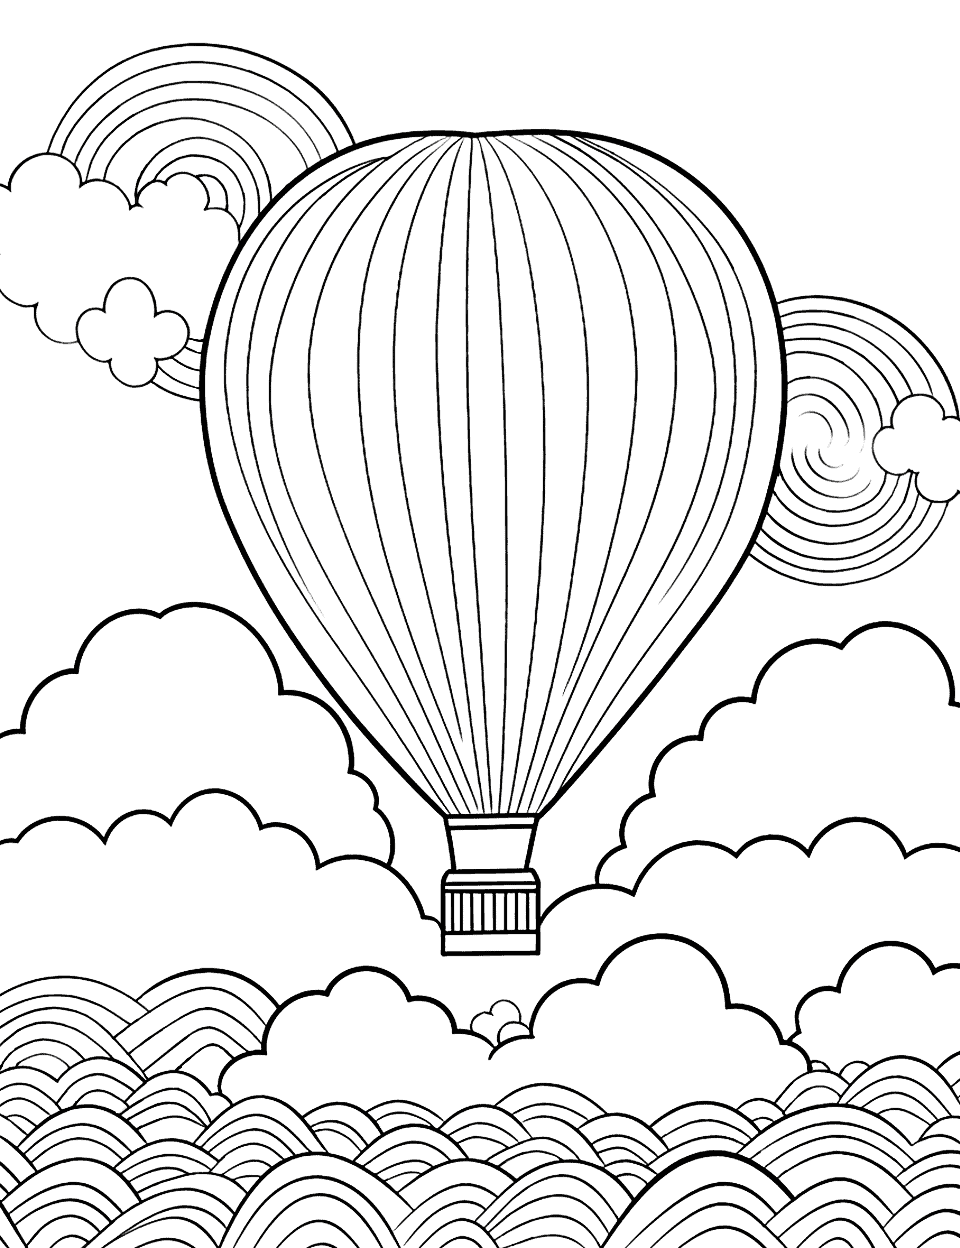 Rainbow Hot Air Balloon Coloring Page - A detailed hot air balloon soaring in the sky with a rainbow.